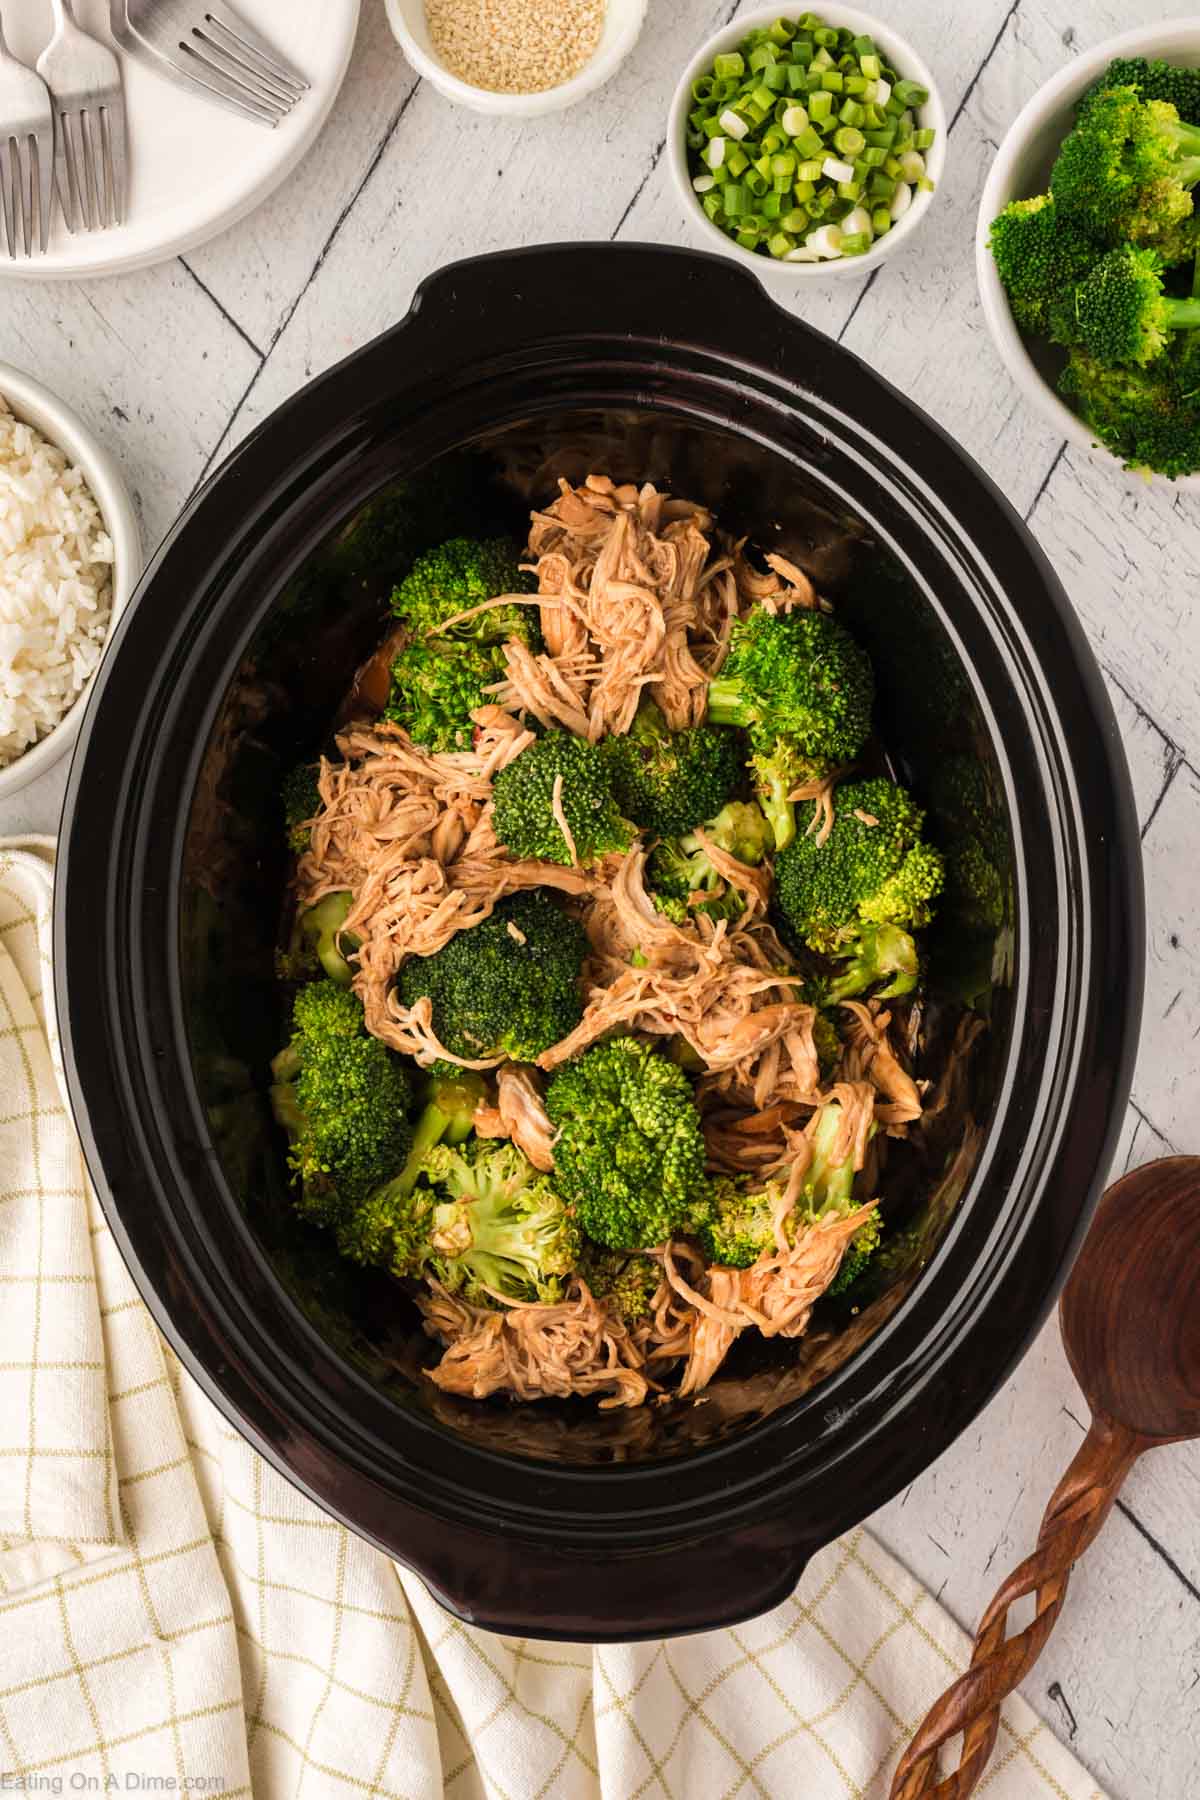 Cooked chicken and broccoli in the slow cooker